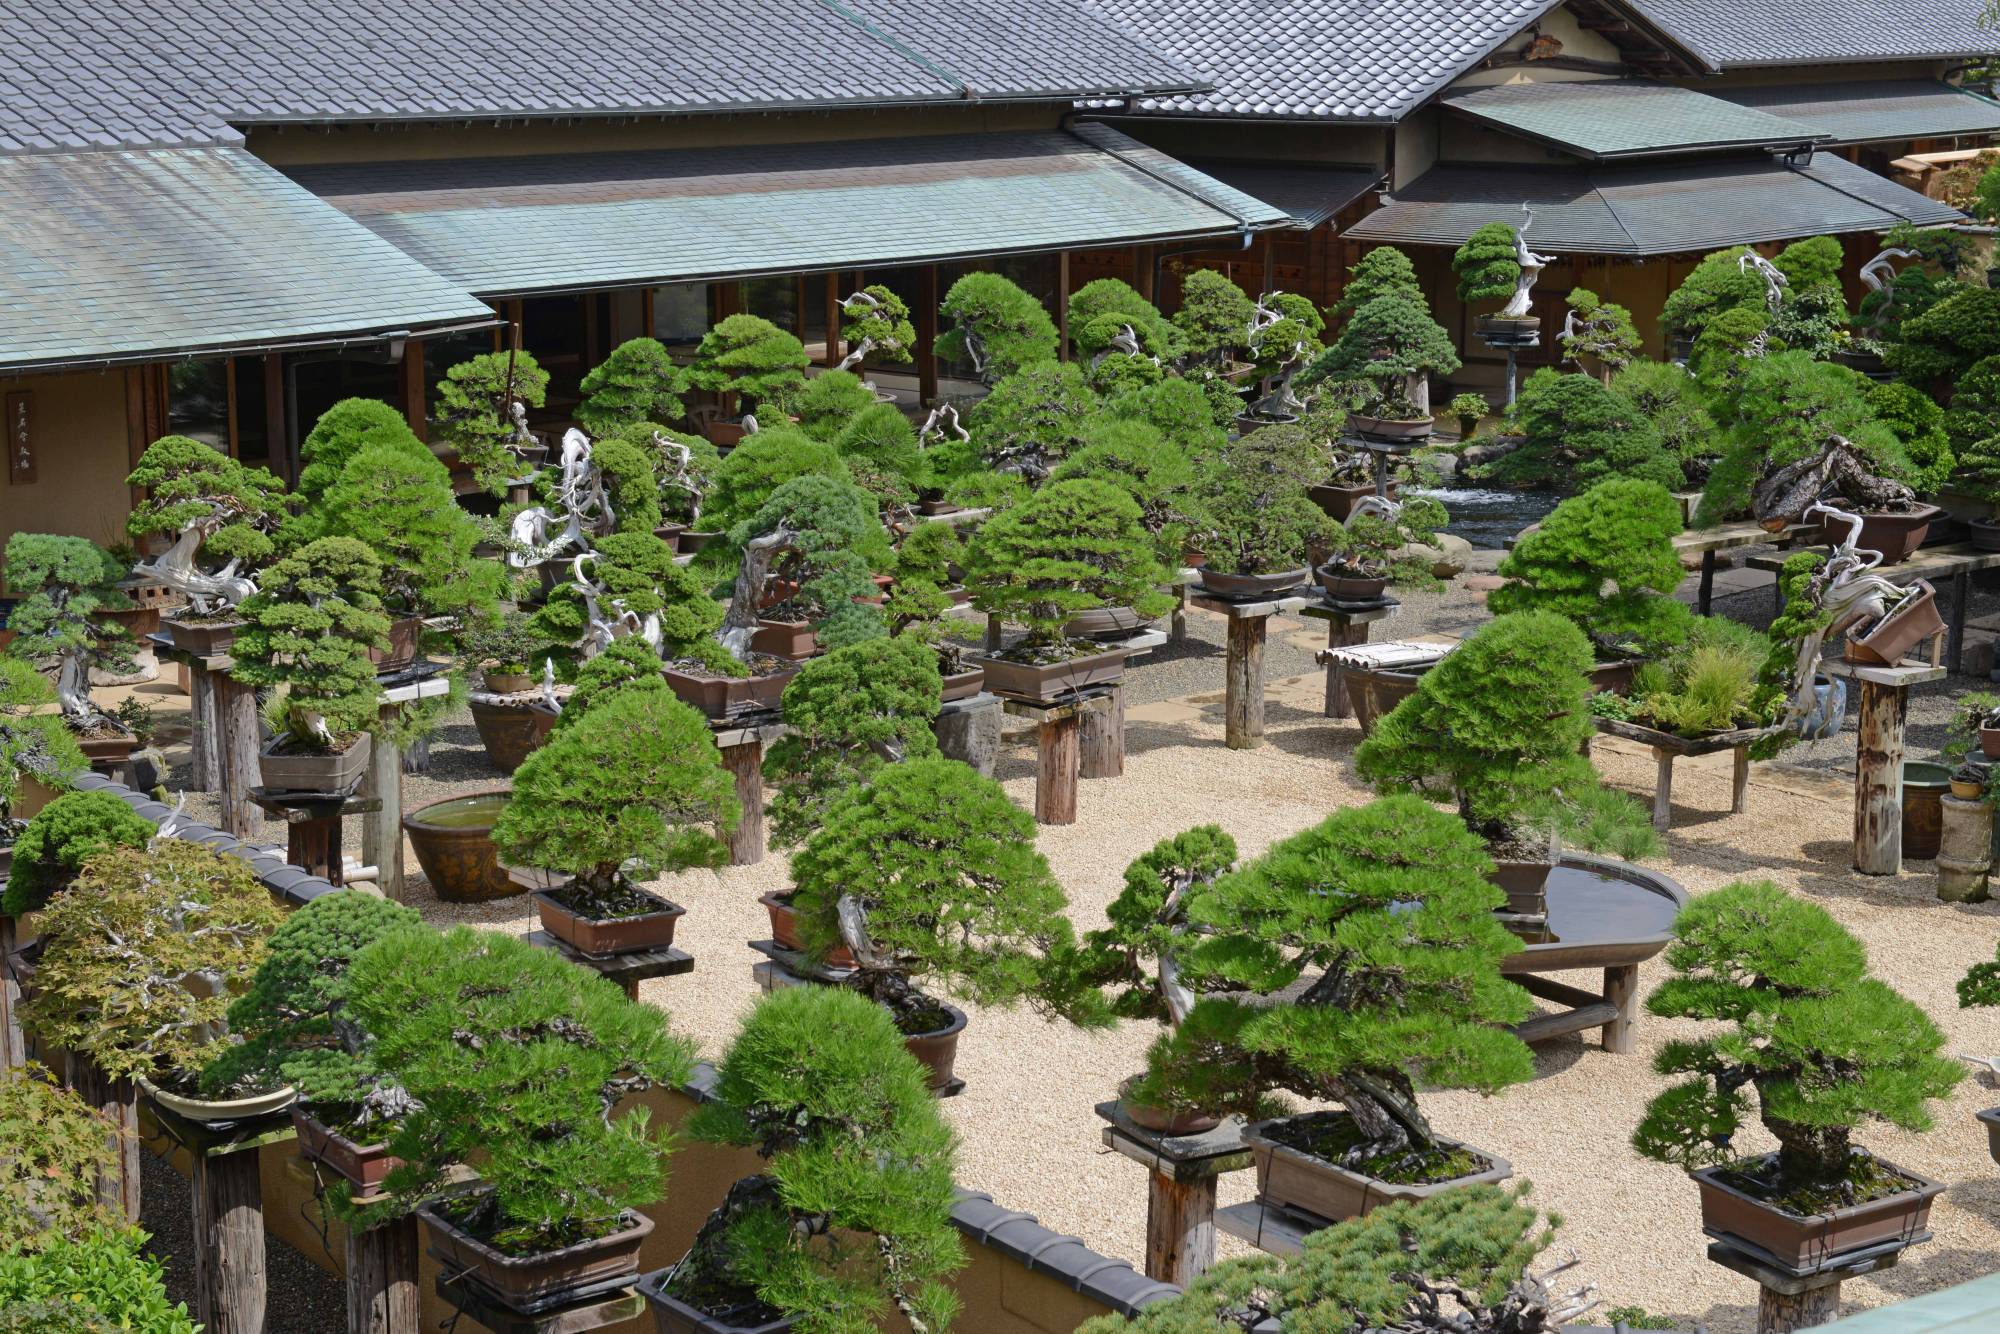 Basics of bonsai: How miniature trees from Asia have transcended frontiers  - The Japan Times